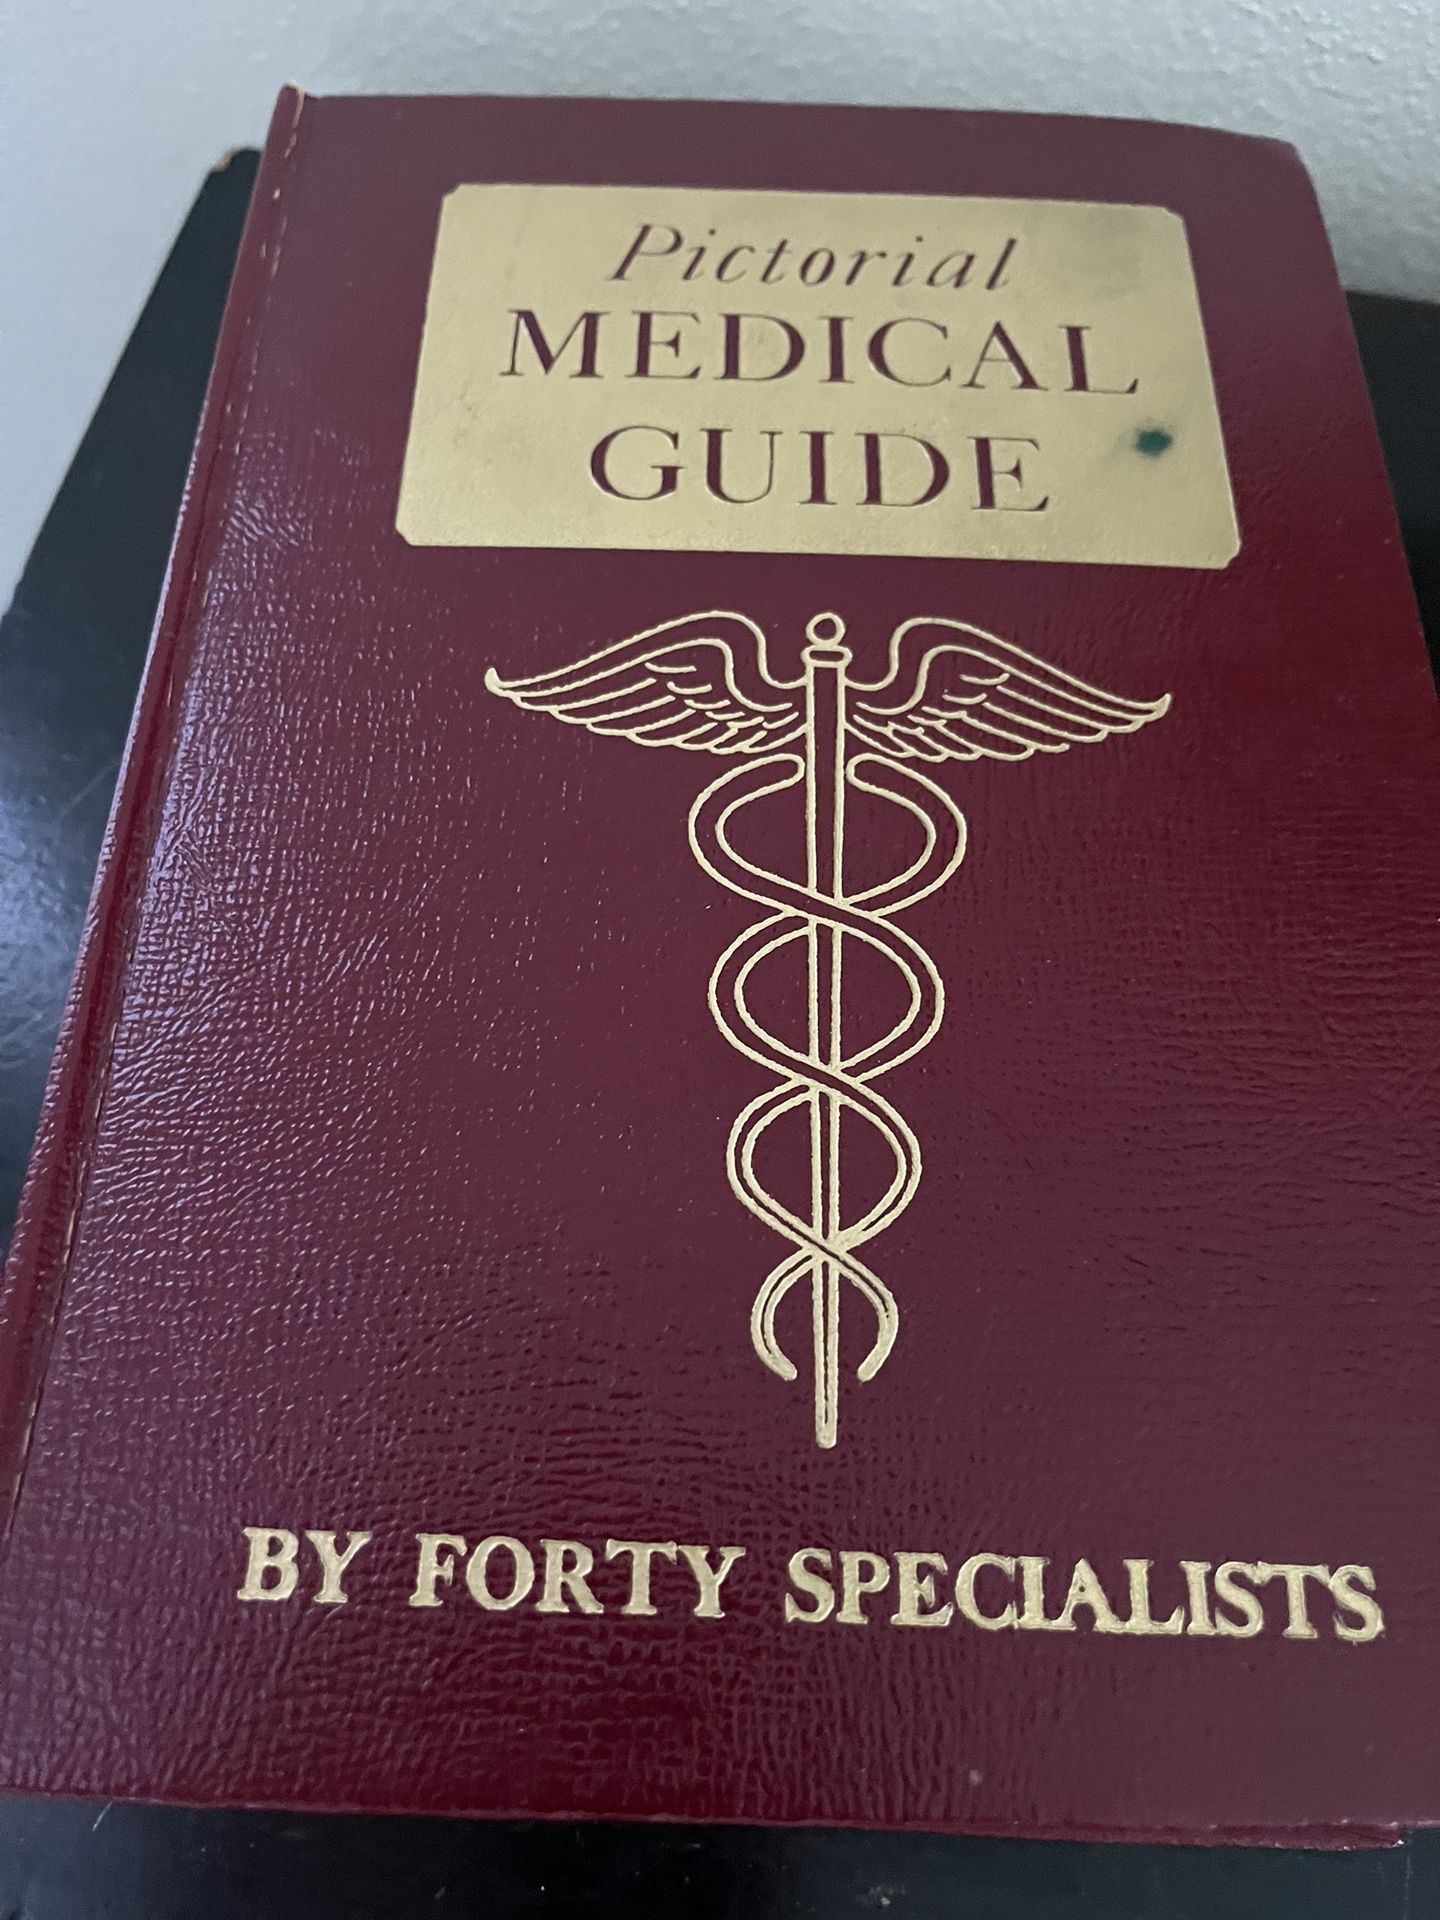 1953 Pictorial Medical Guide by Forty Specialists